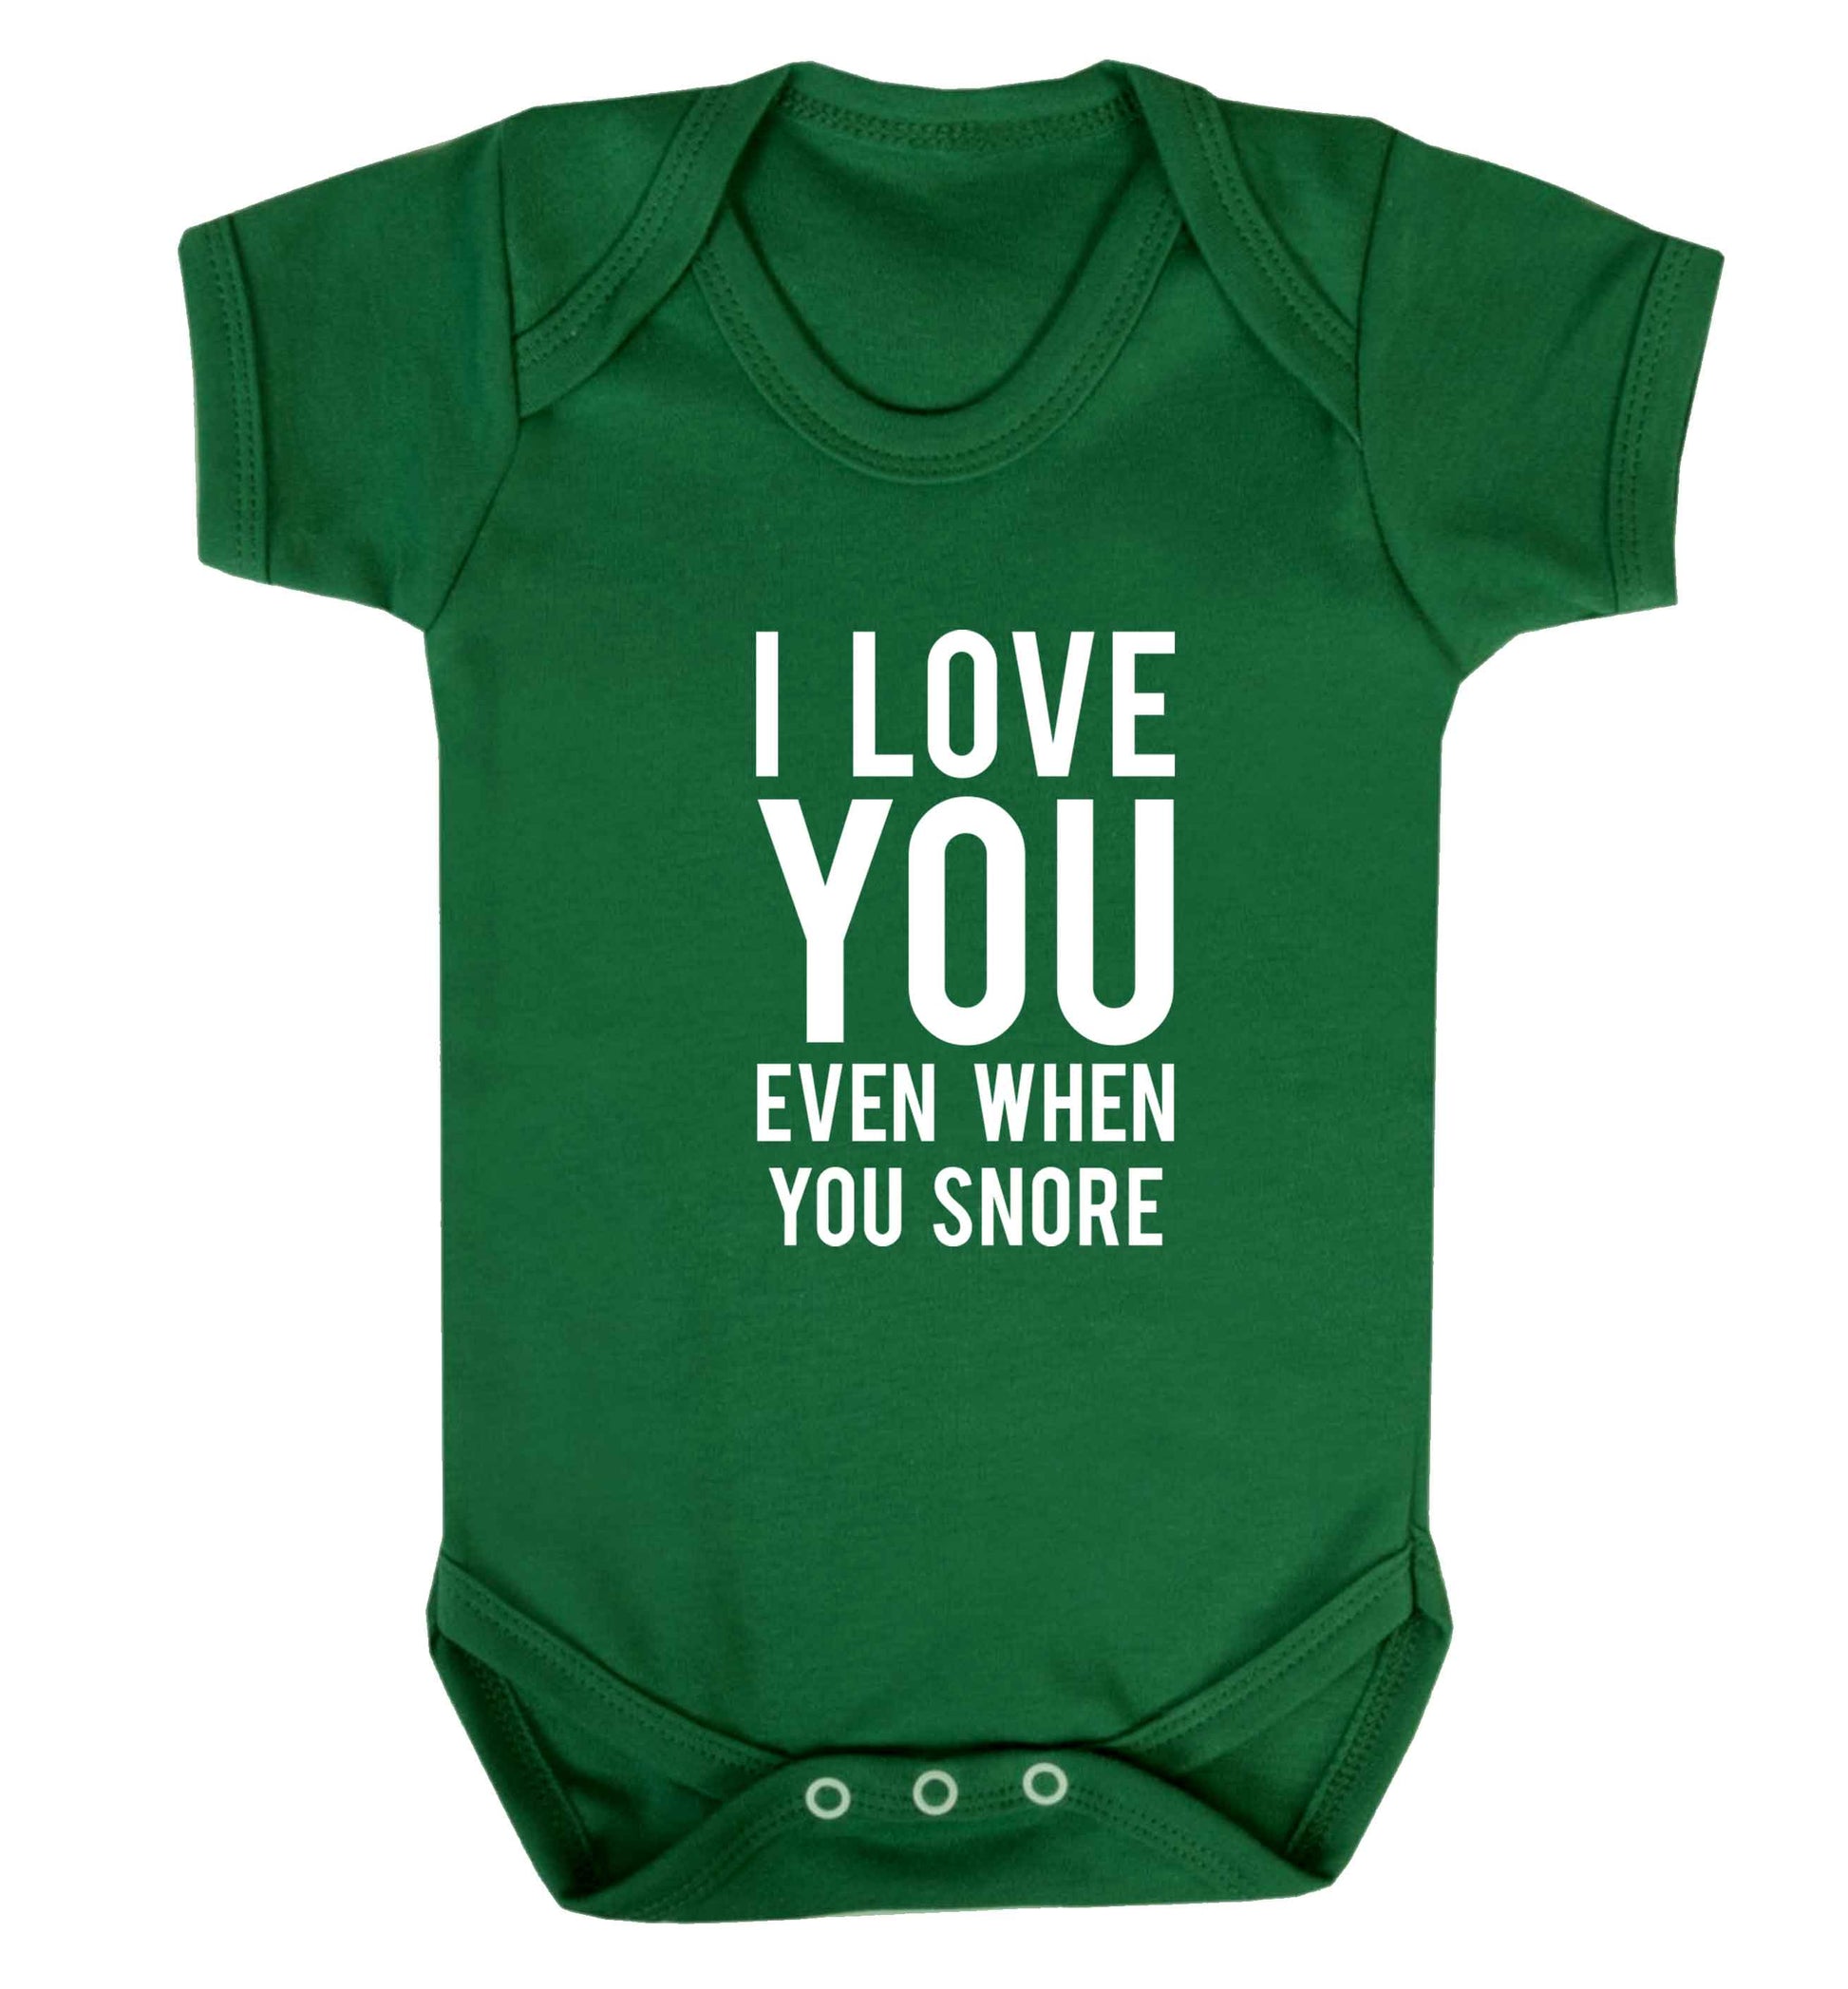 I love you even when you snore baby vest green 18-24 months